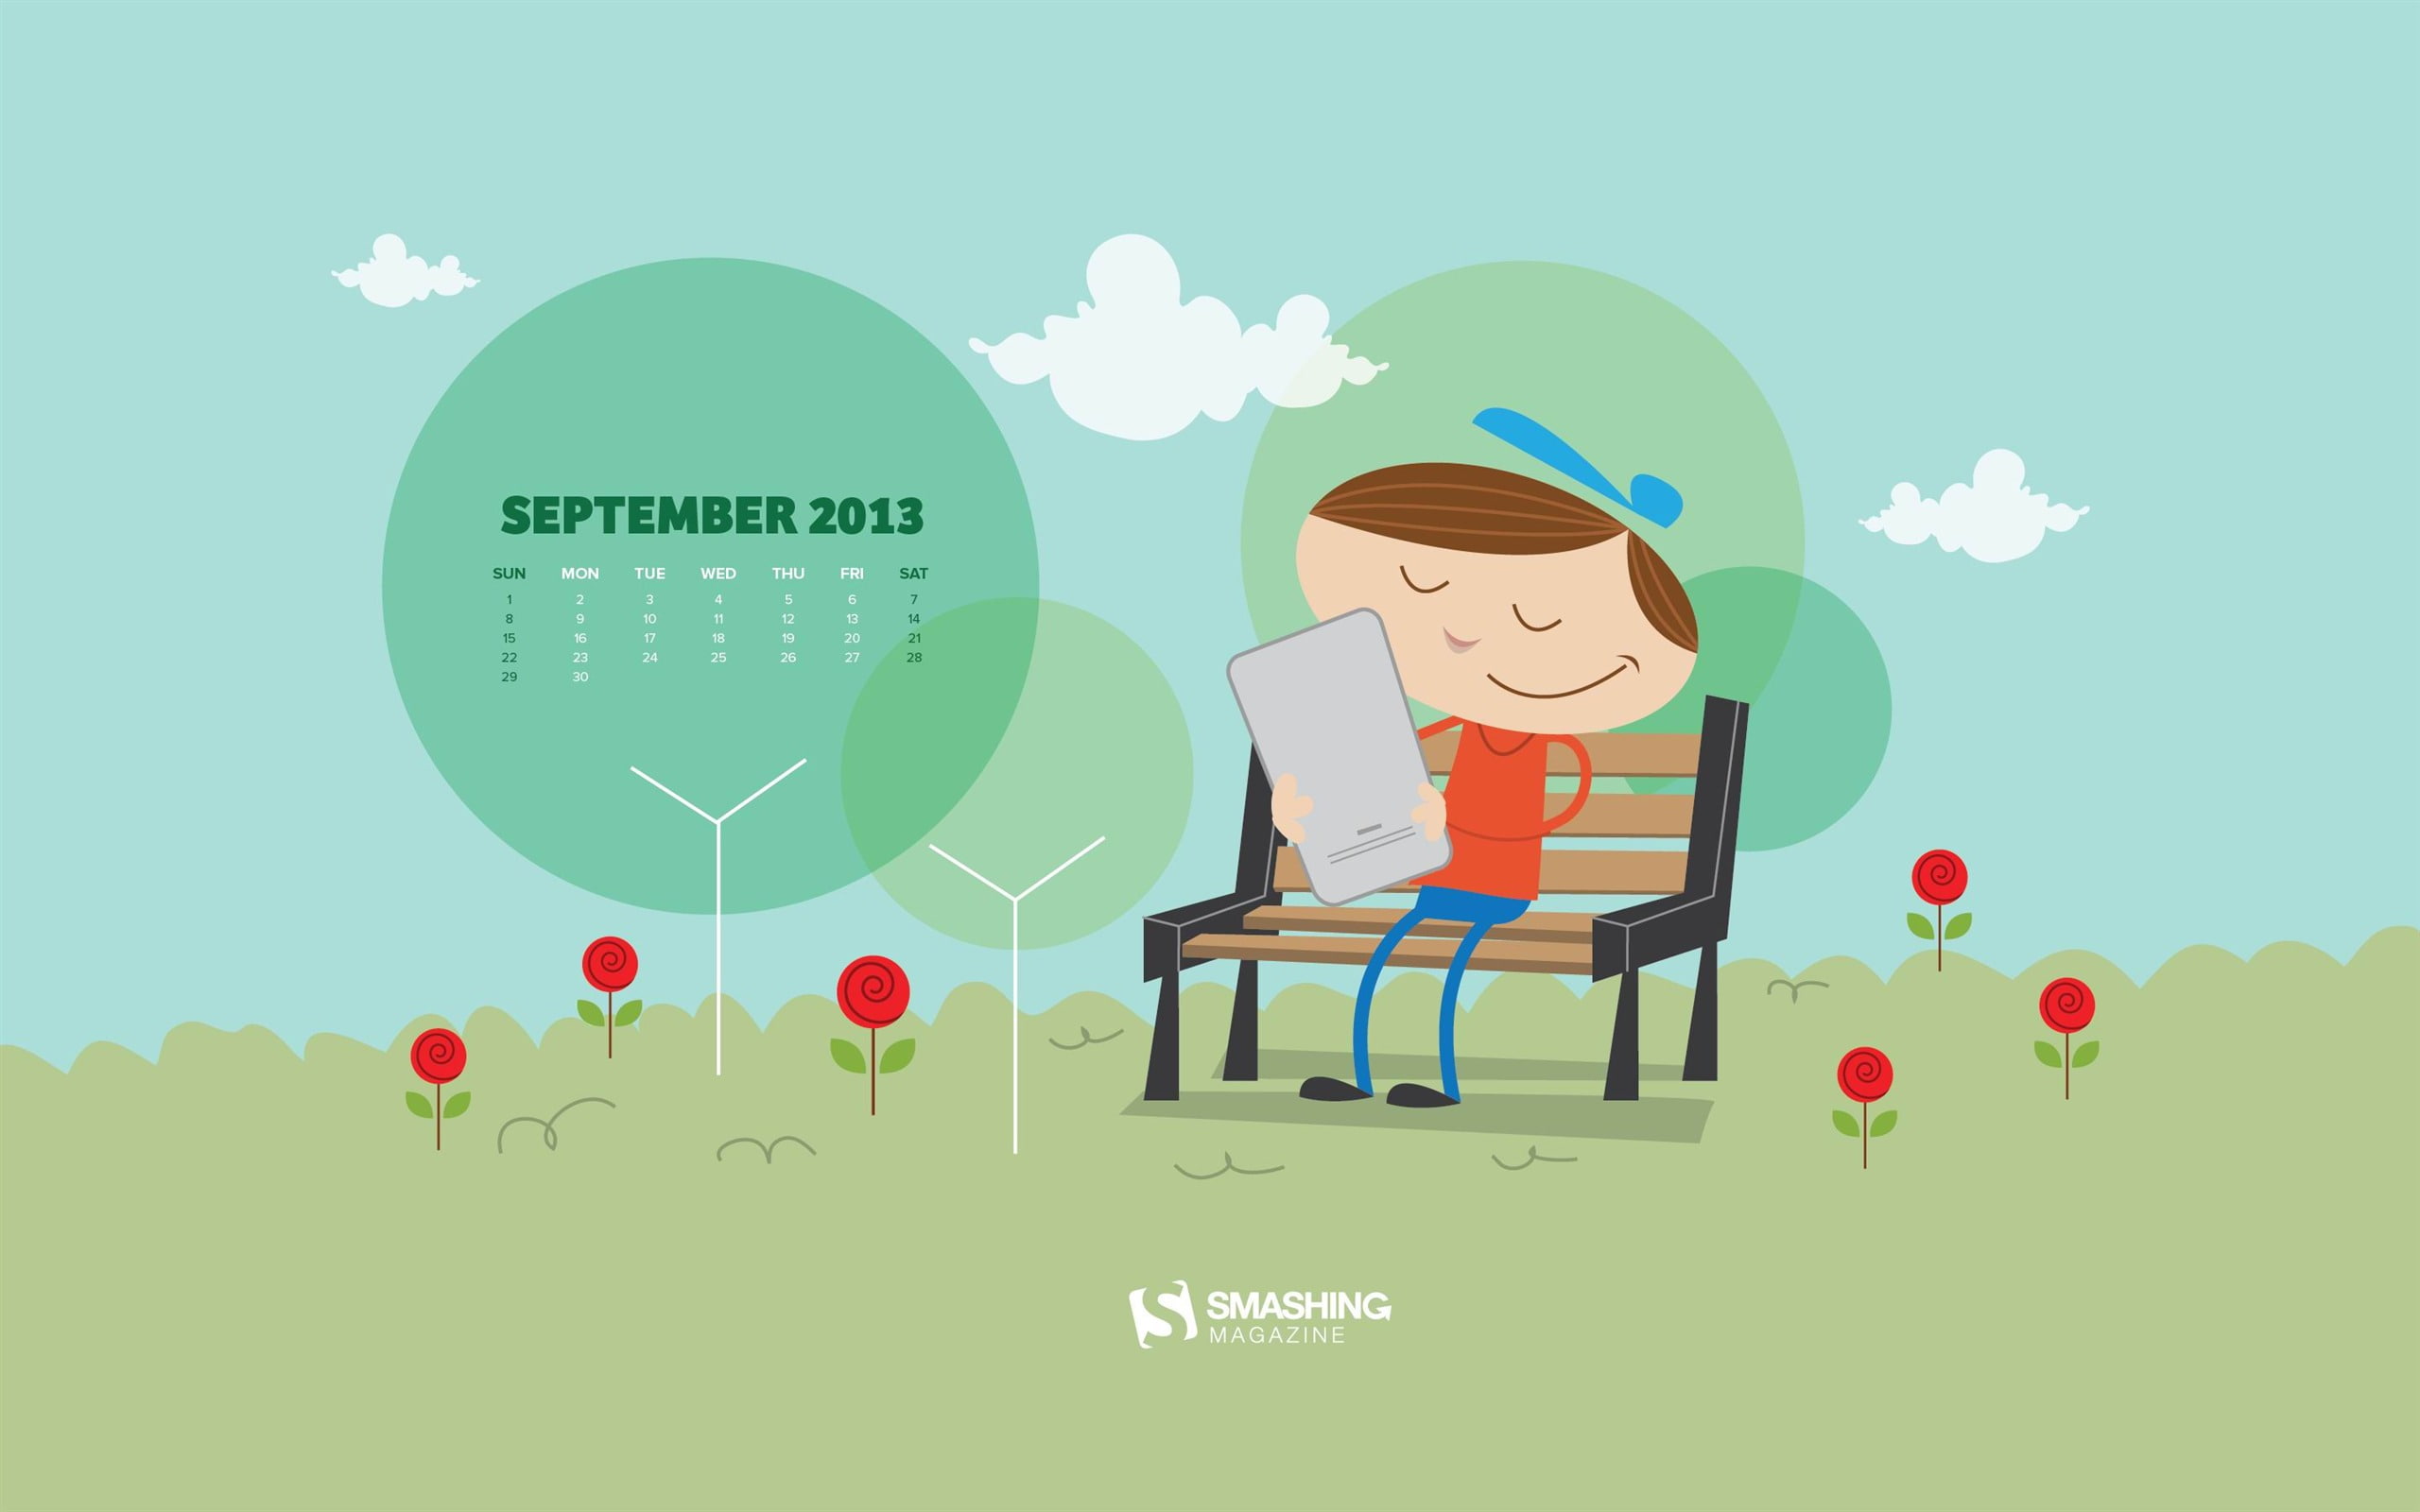 The Books That You Will Love-September 2013 Calend.., male cartoon character clip art